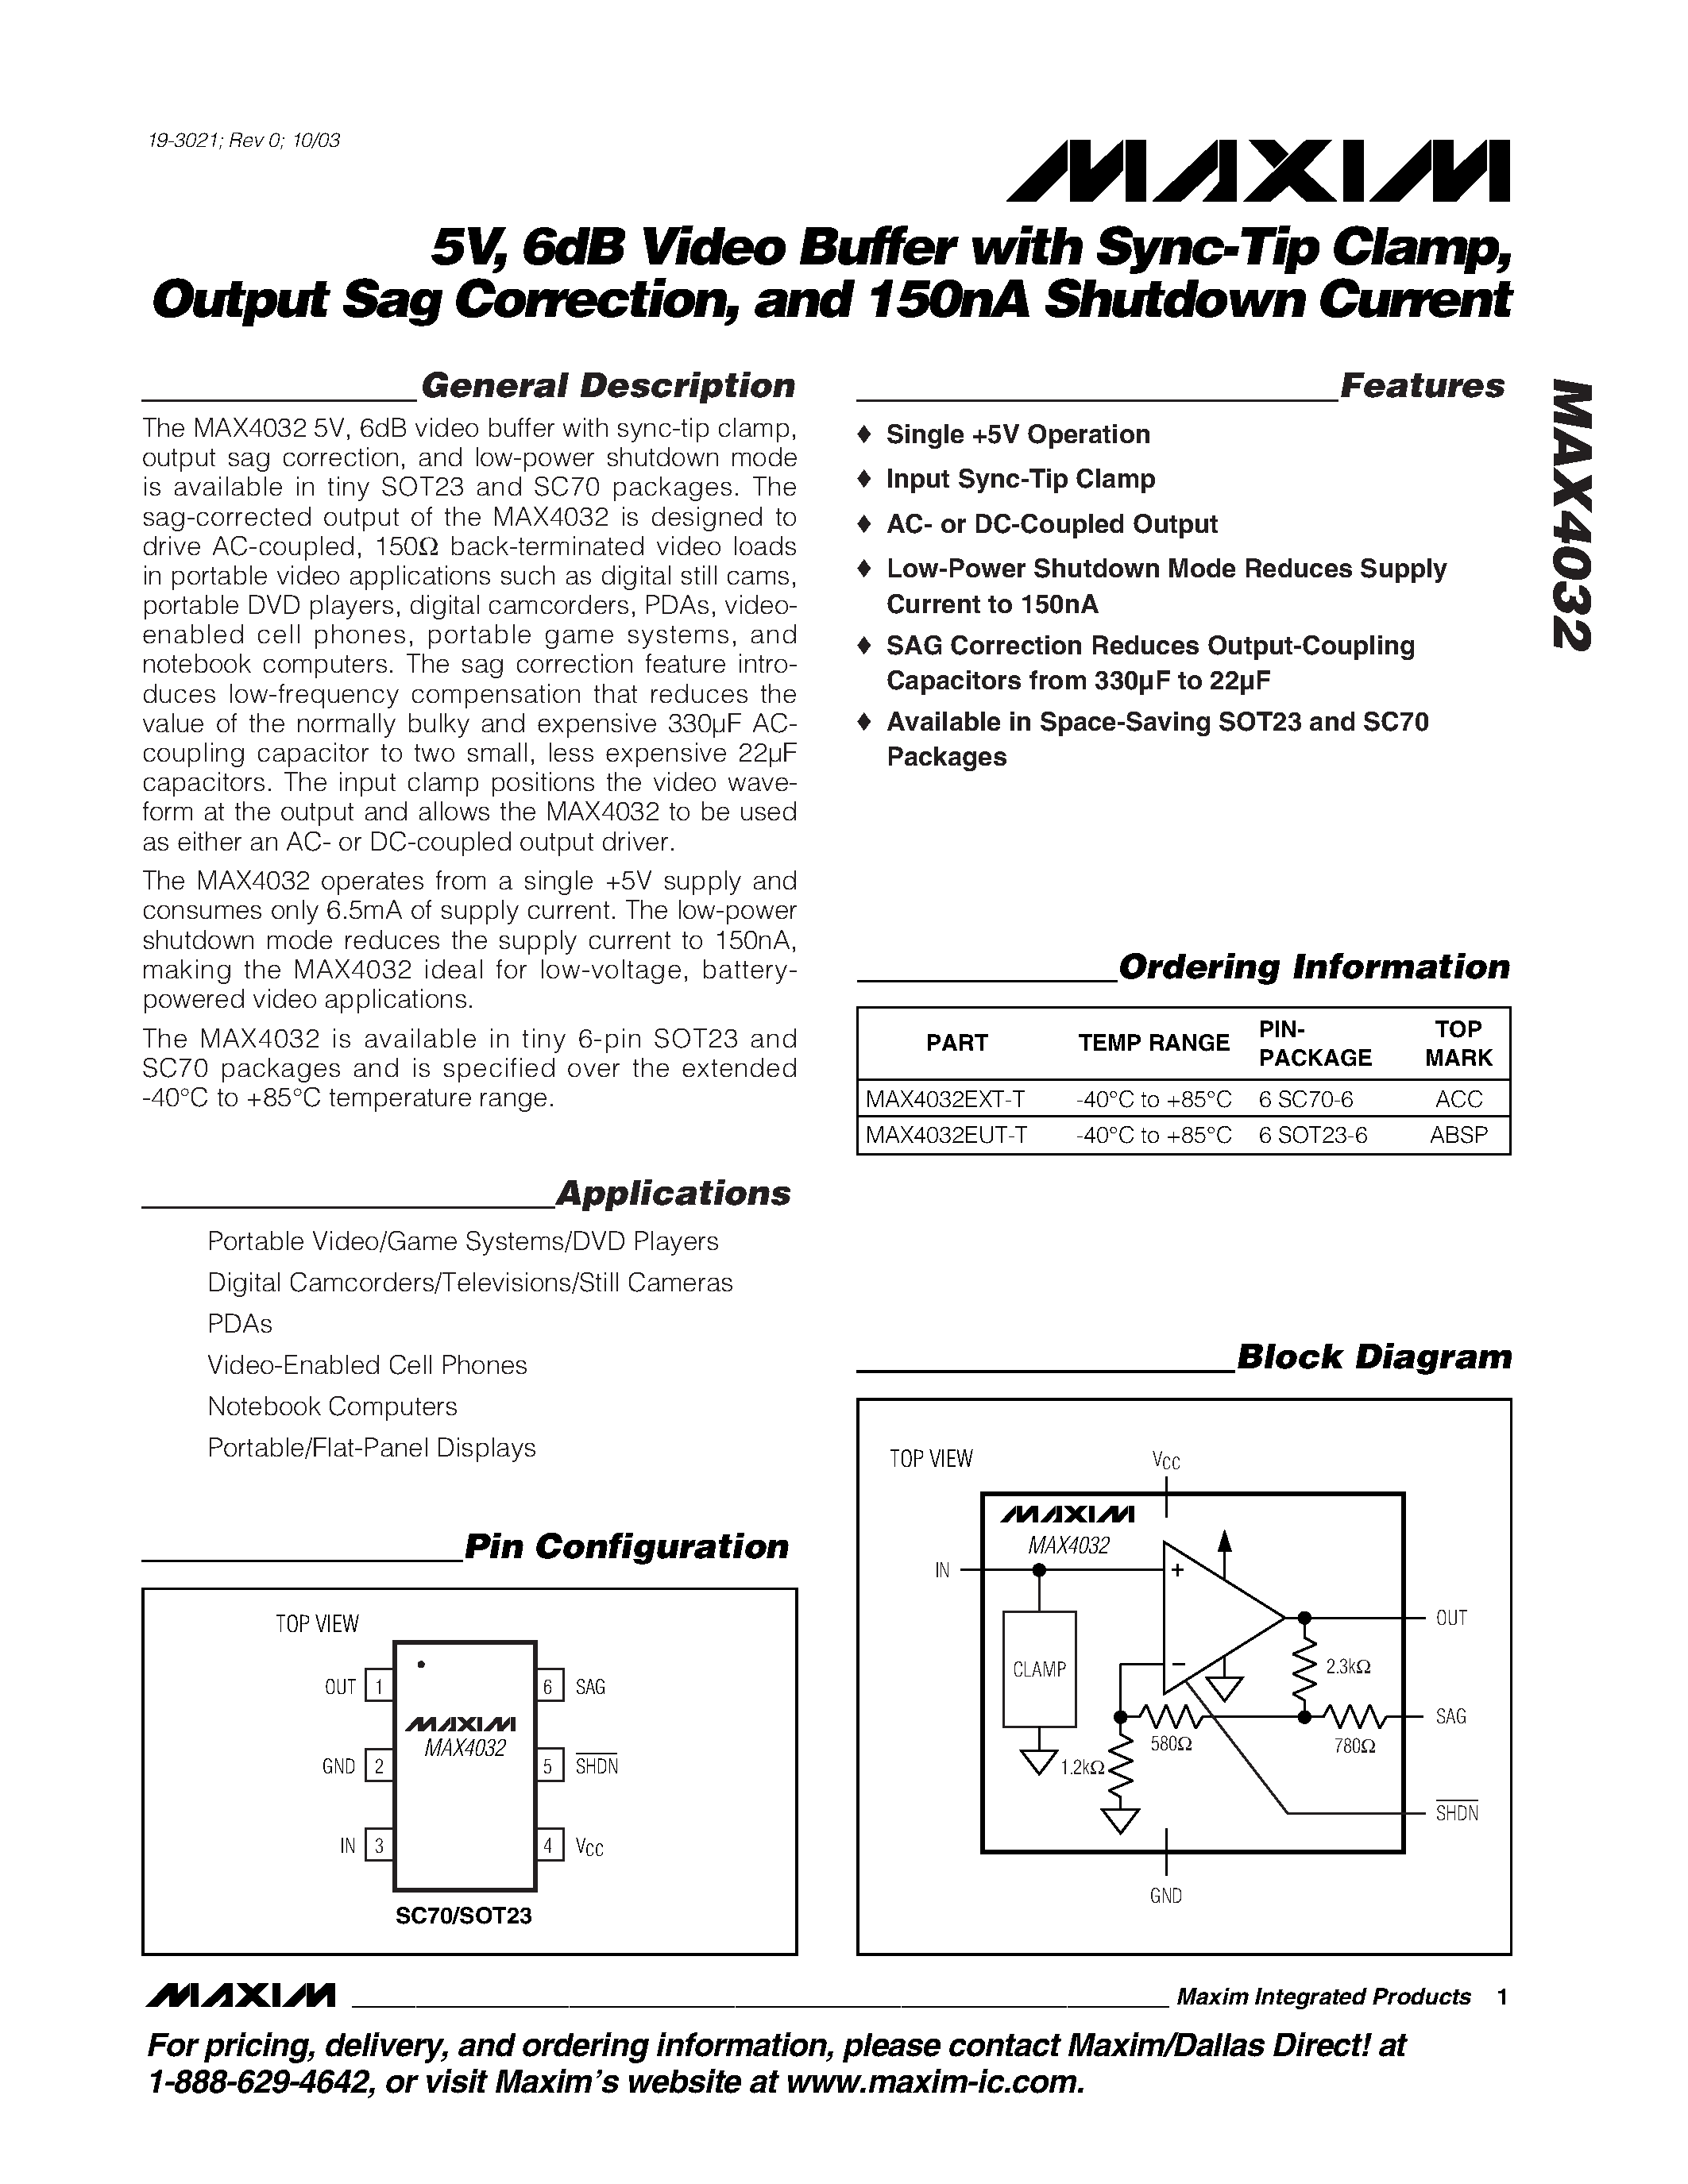 Datasheet MAX4032 - 5V / 6dB Video Buffer with Sync-Tip Clamp / Output Sag Correction / and 150nA Shutdown Current page 1